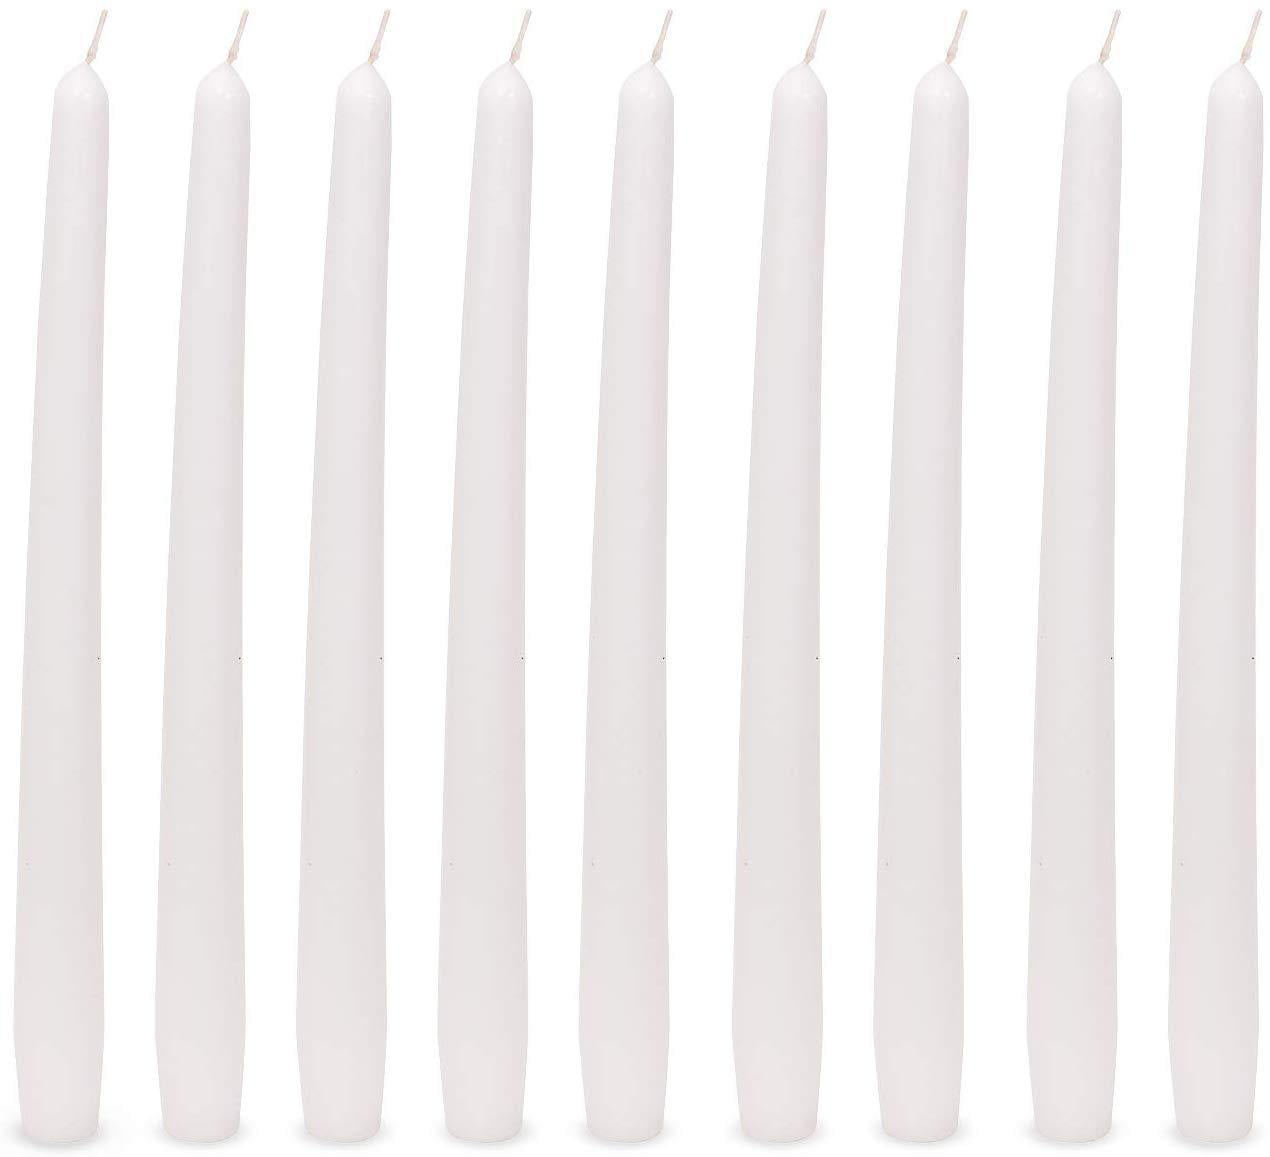 White Taper Candles - 30-Pack - 8 hours Burn Time - Walmart.com ...